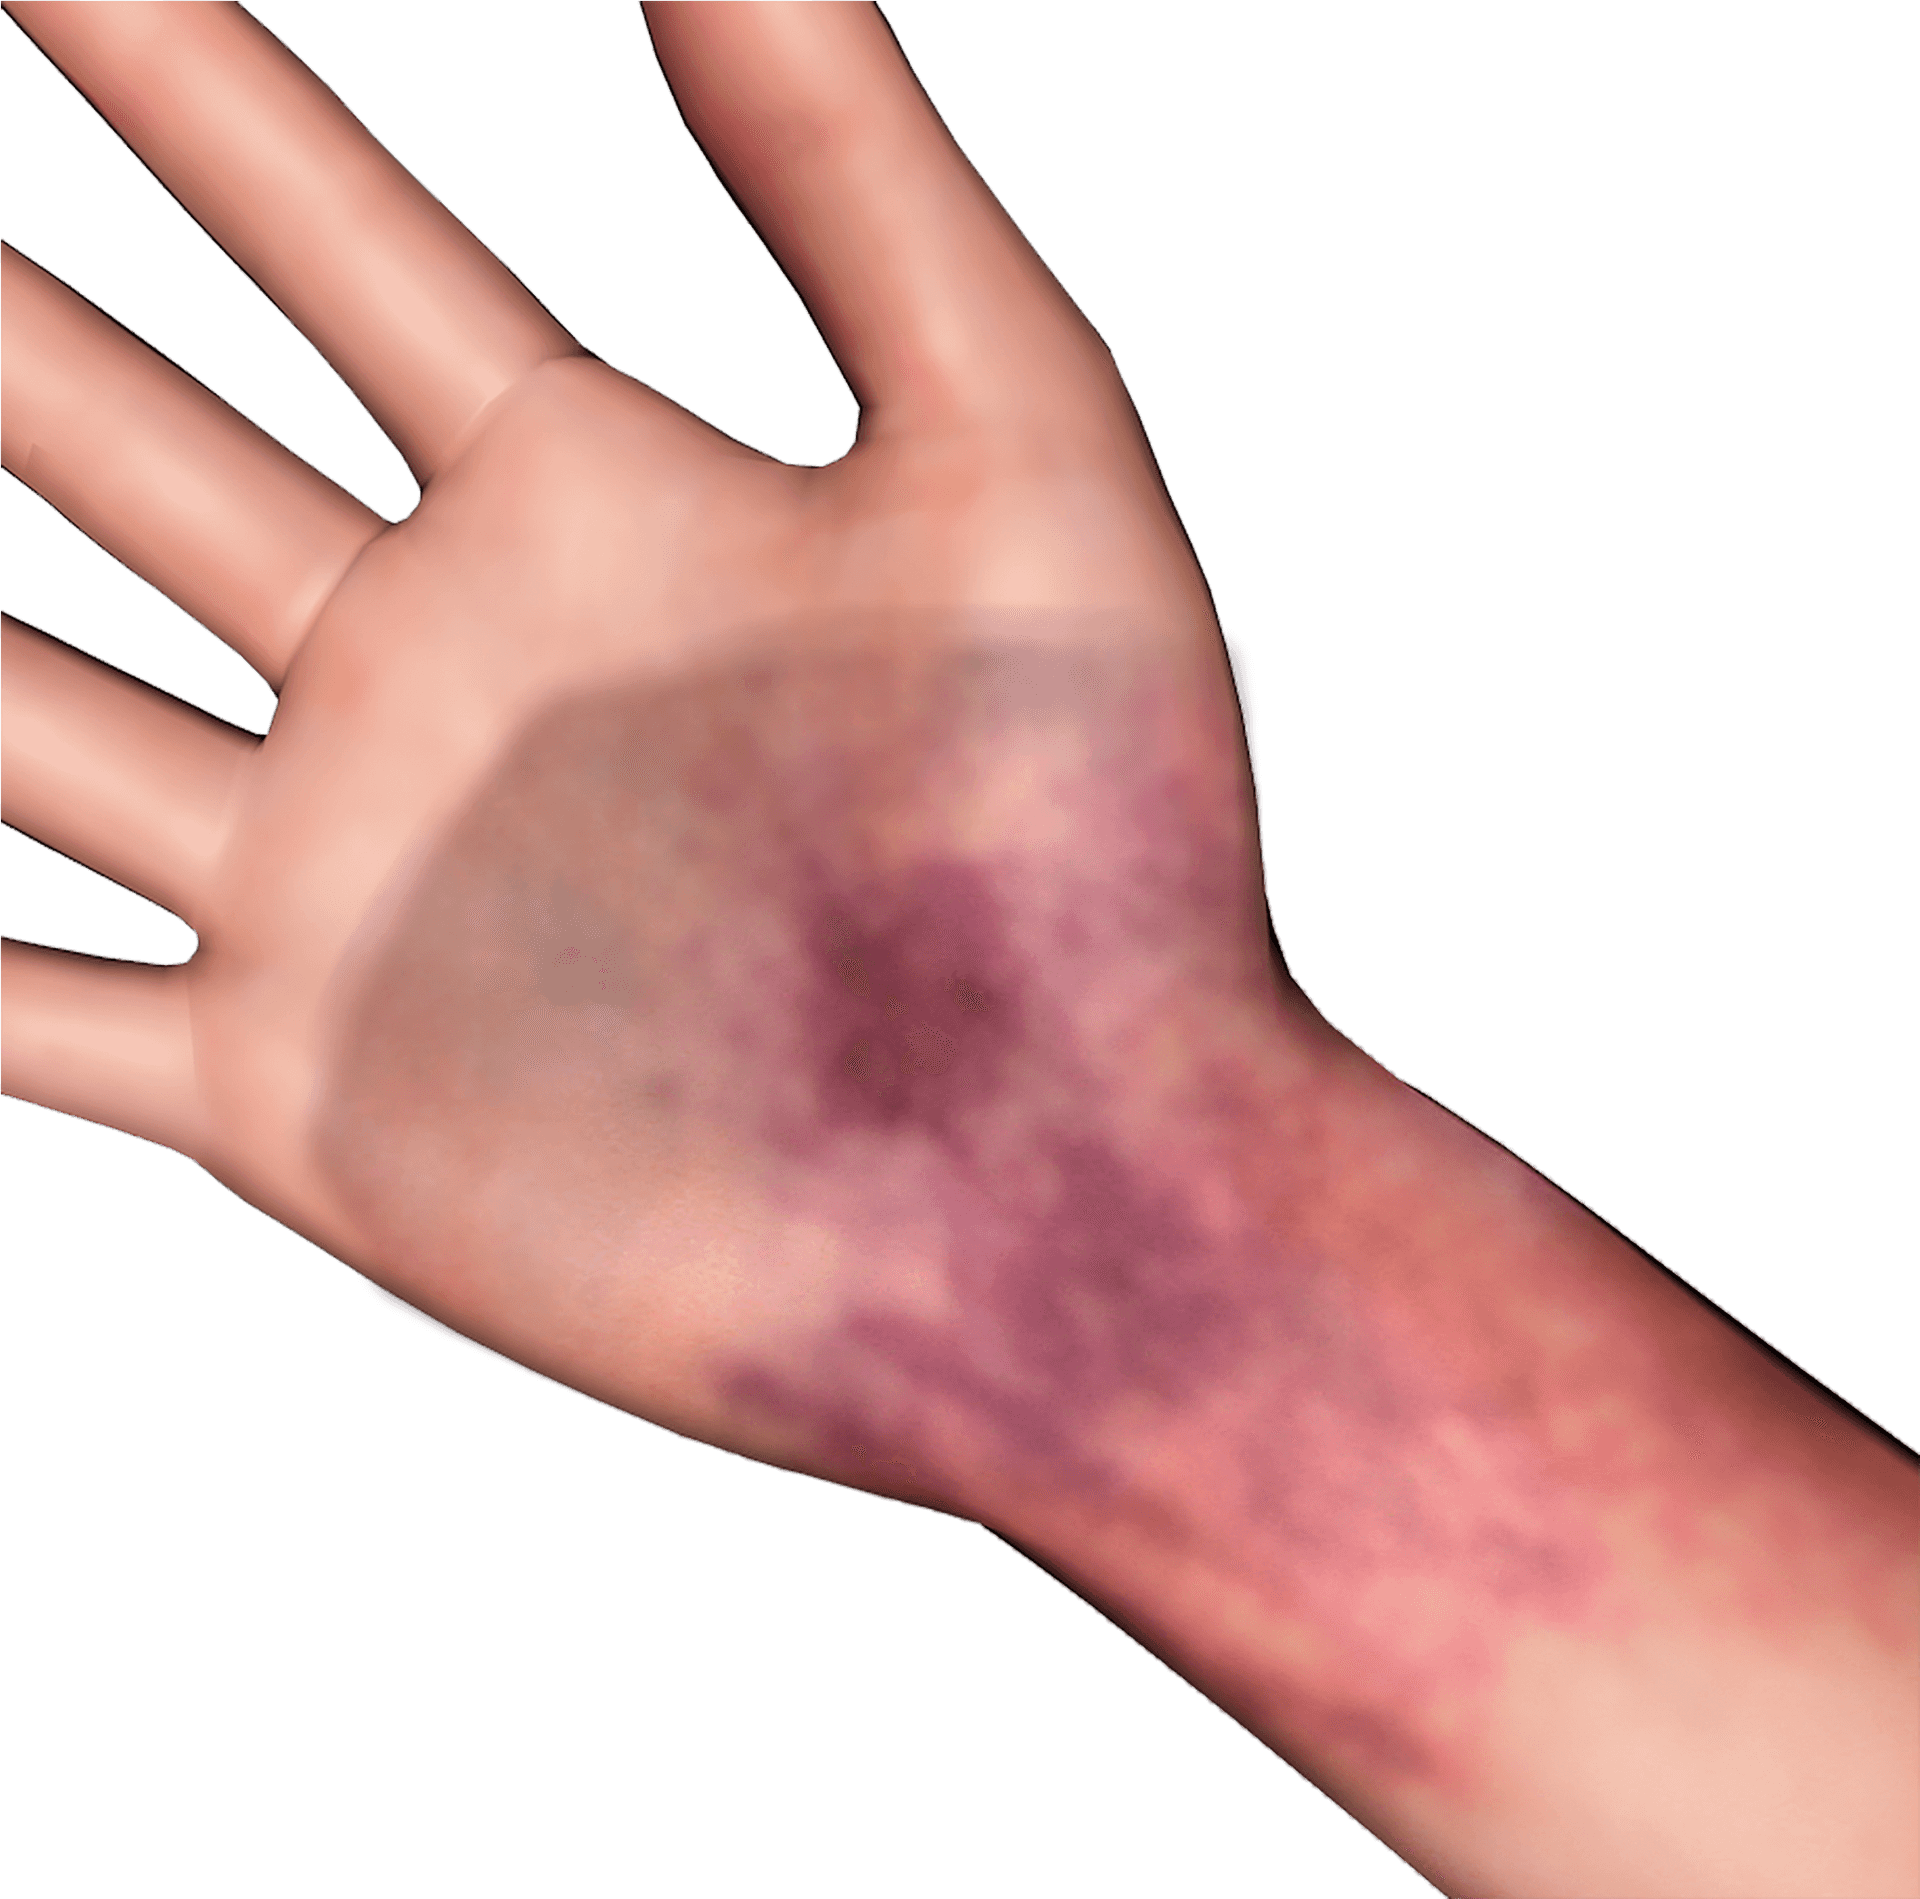 Handwith Bruise Image PNG